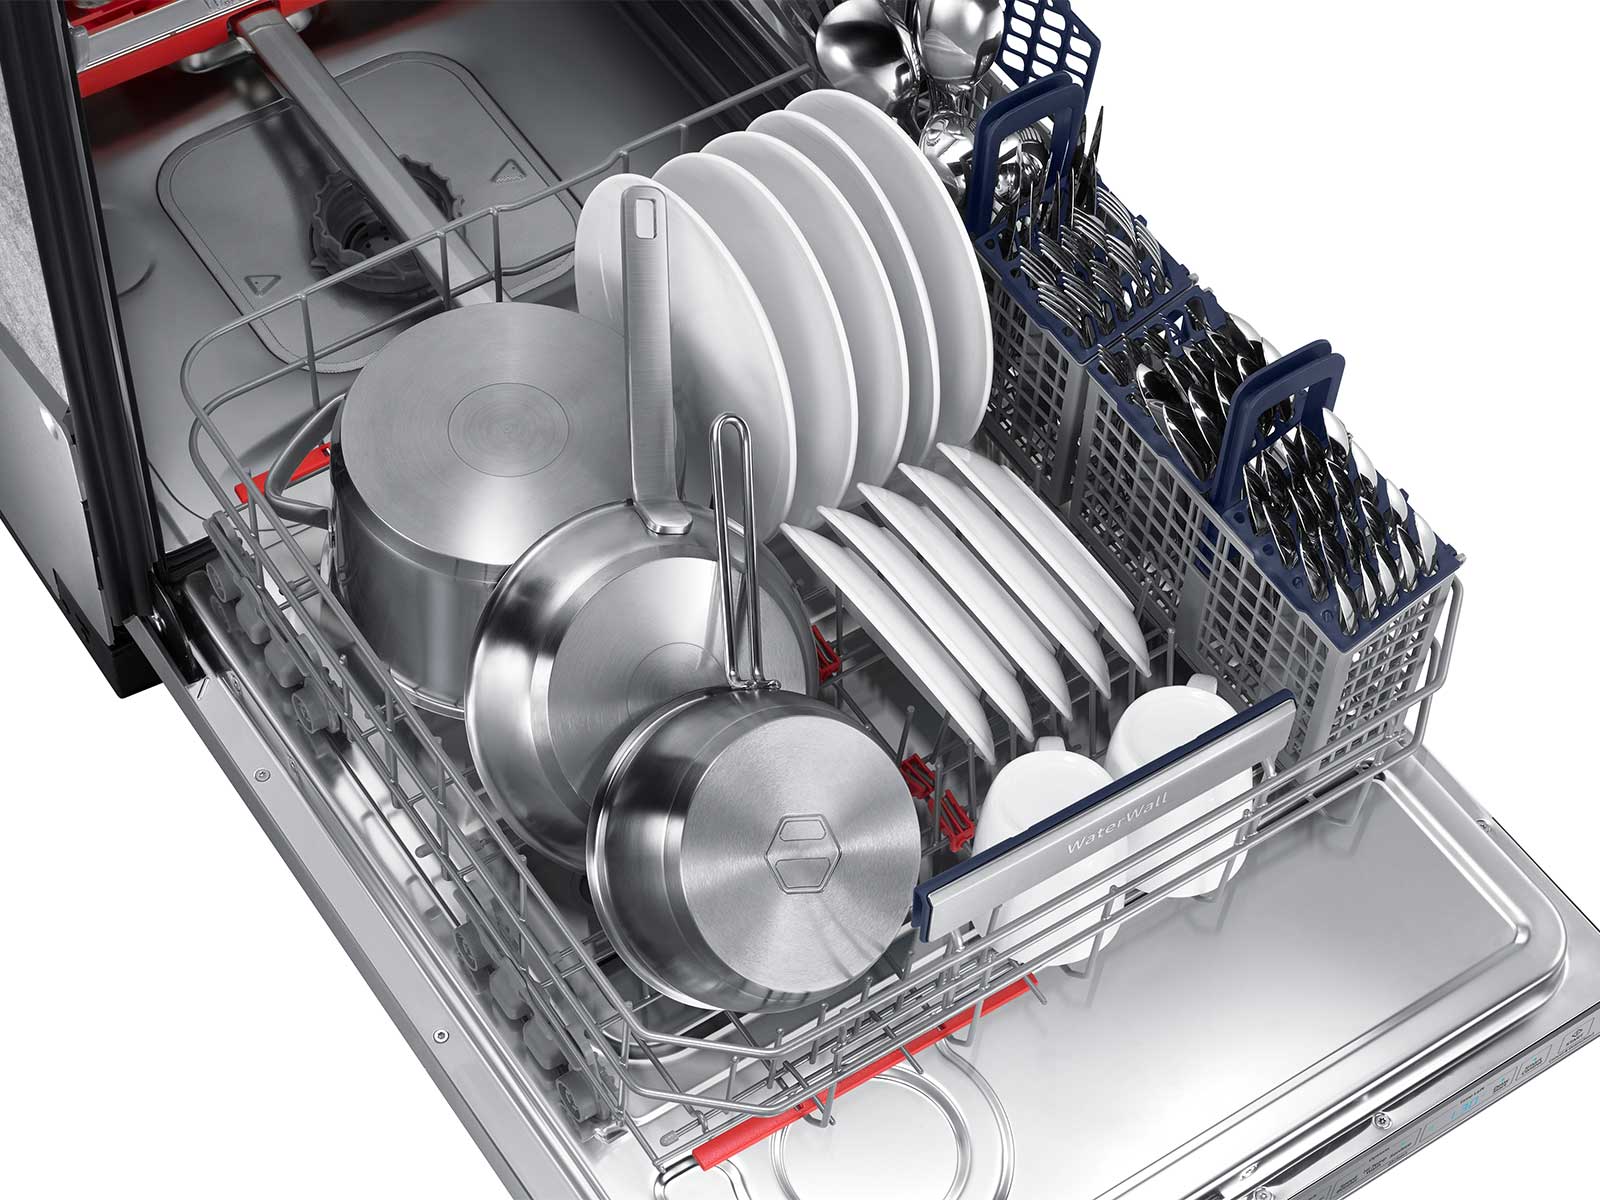 How to Repair a Dishwasher Rack - A to Z Appliance Service